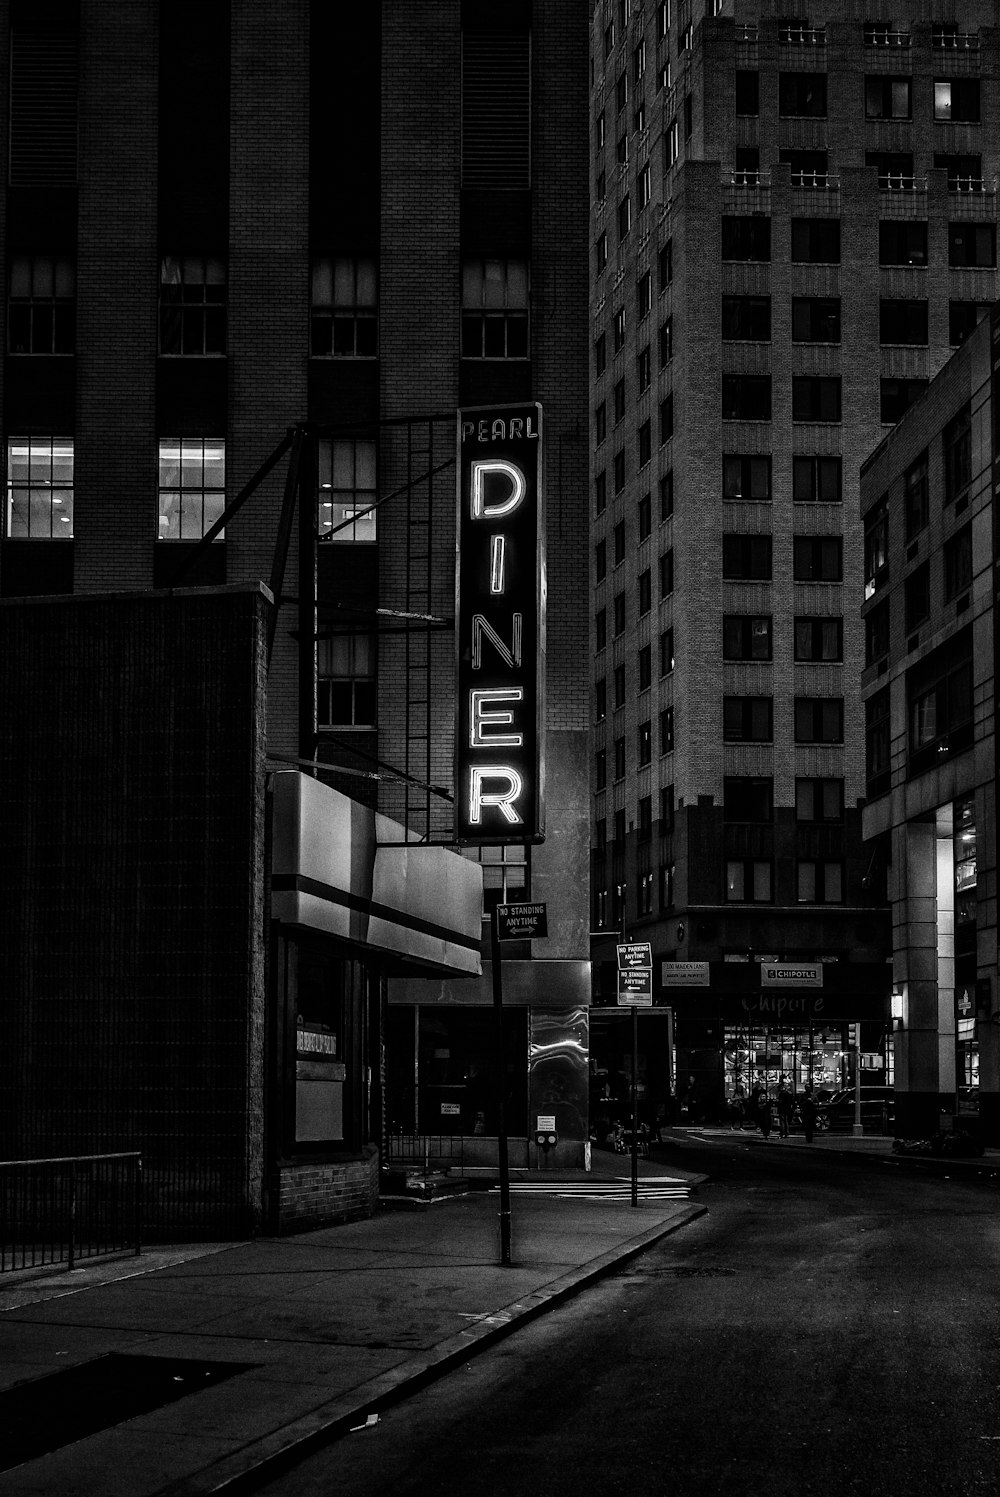 grayscale photo of Pearl Diner sign in city